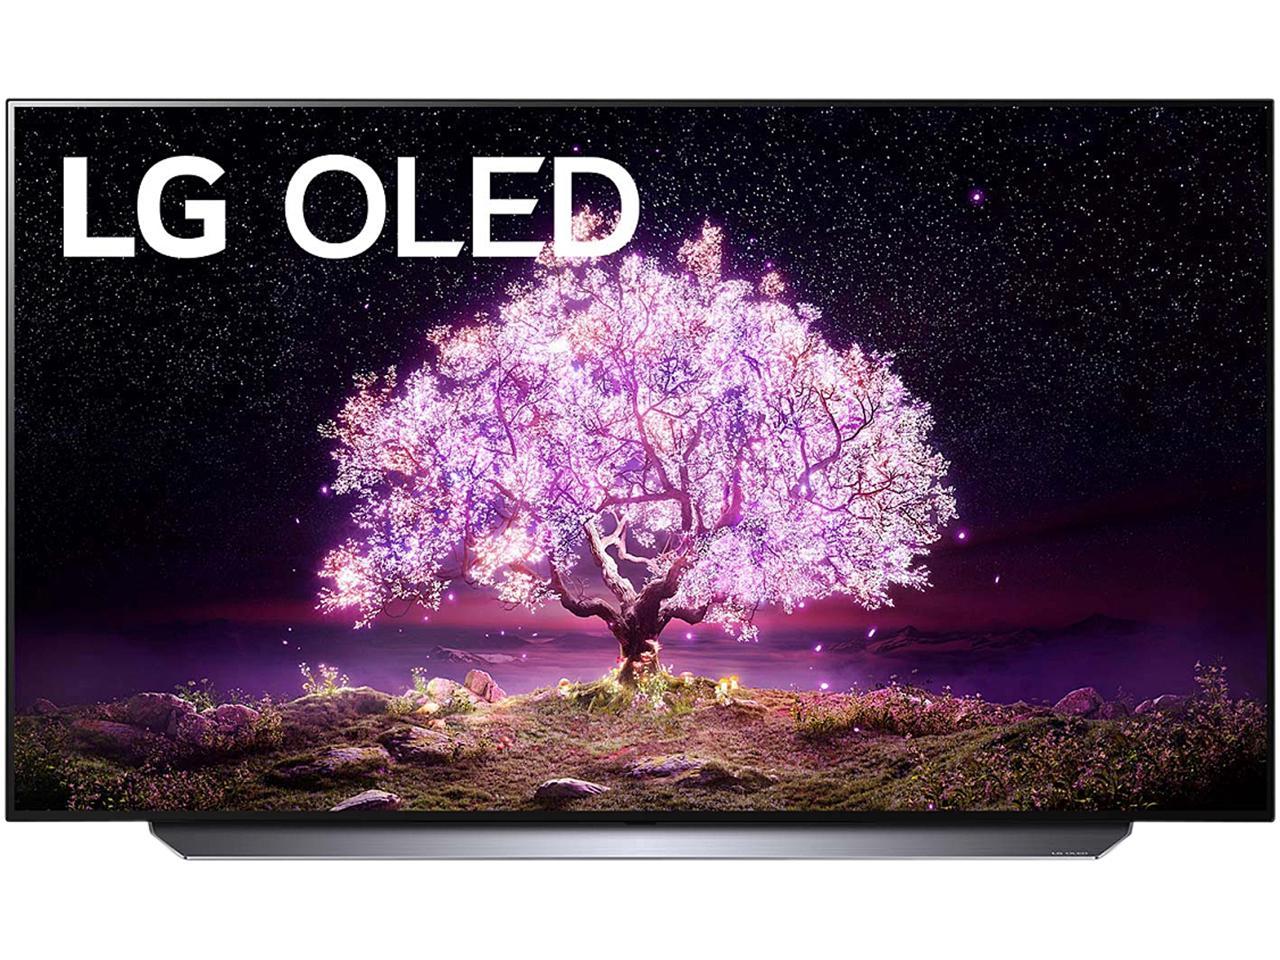 LG 77" OLED77C1PUB 4K Smart OLED TV For $2996.99 + FS (Newegg $300 Gift Card and 3 Year Protection Plan free w/ purchase)